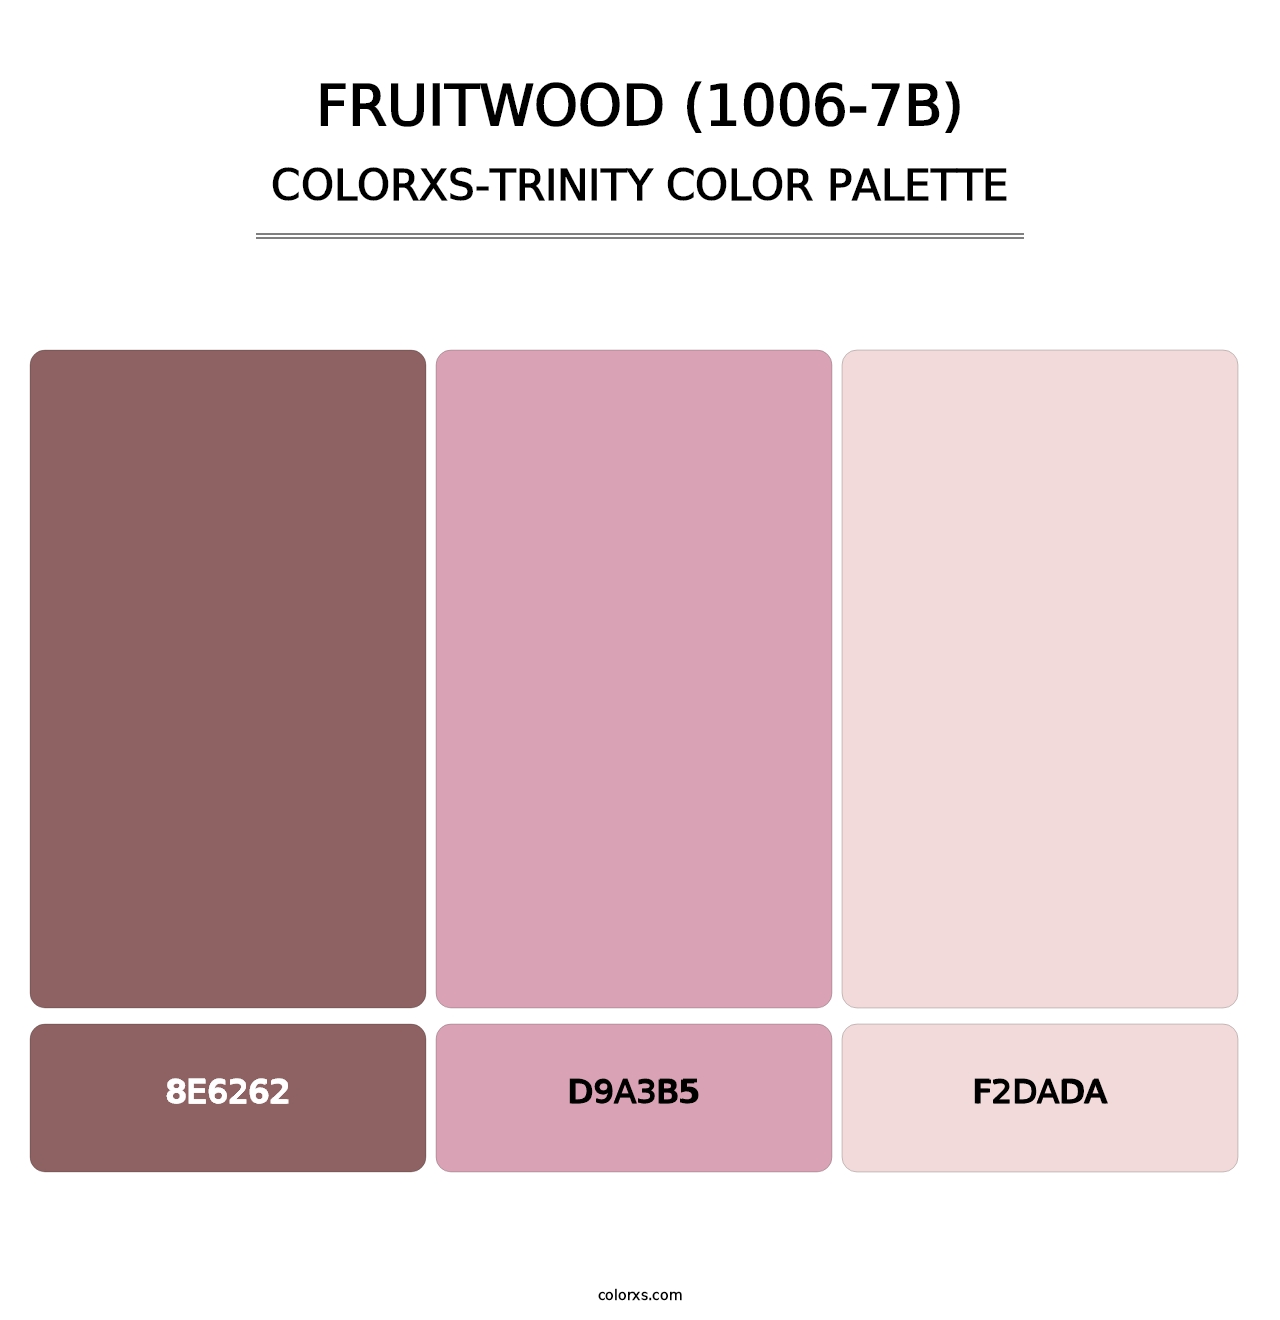 Fruitwood (1006-7B) - Colorxs Trinity Palette